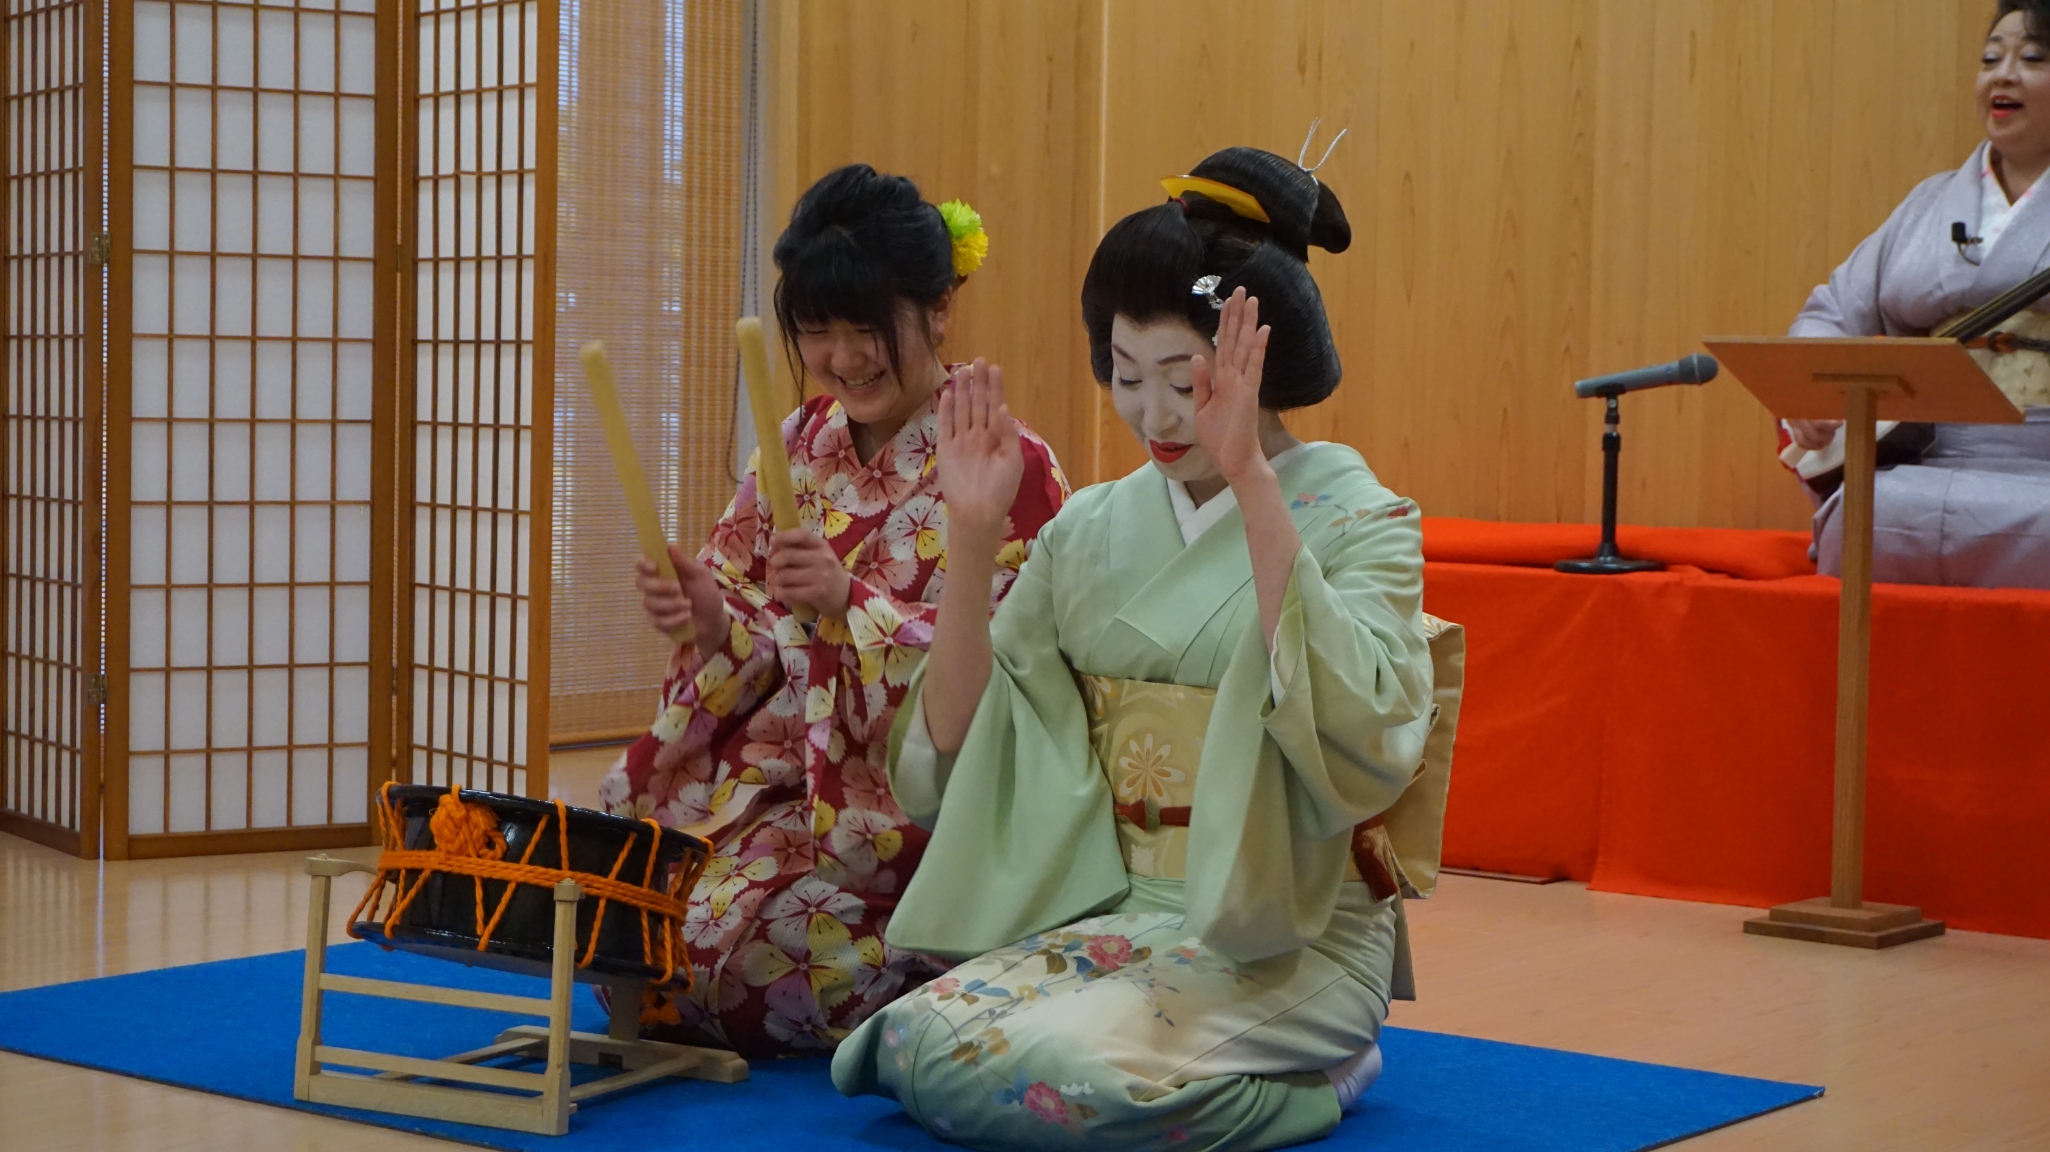 Traditional Entertainment Experiences with Geisha Entertainers02